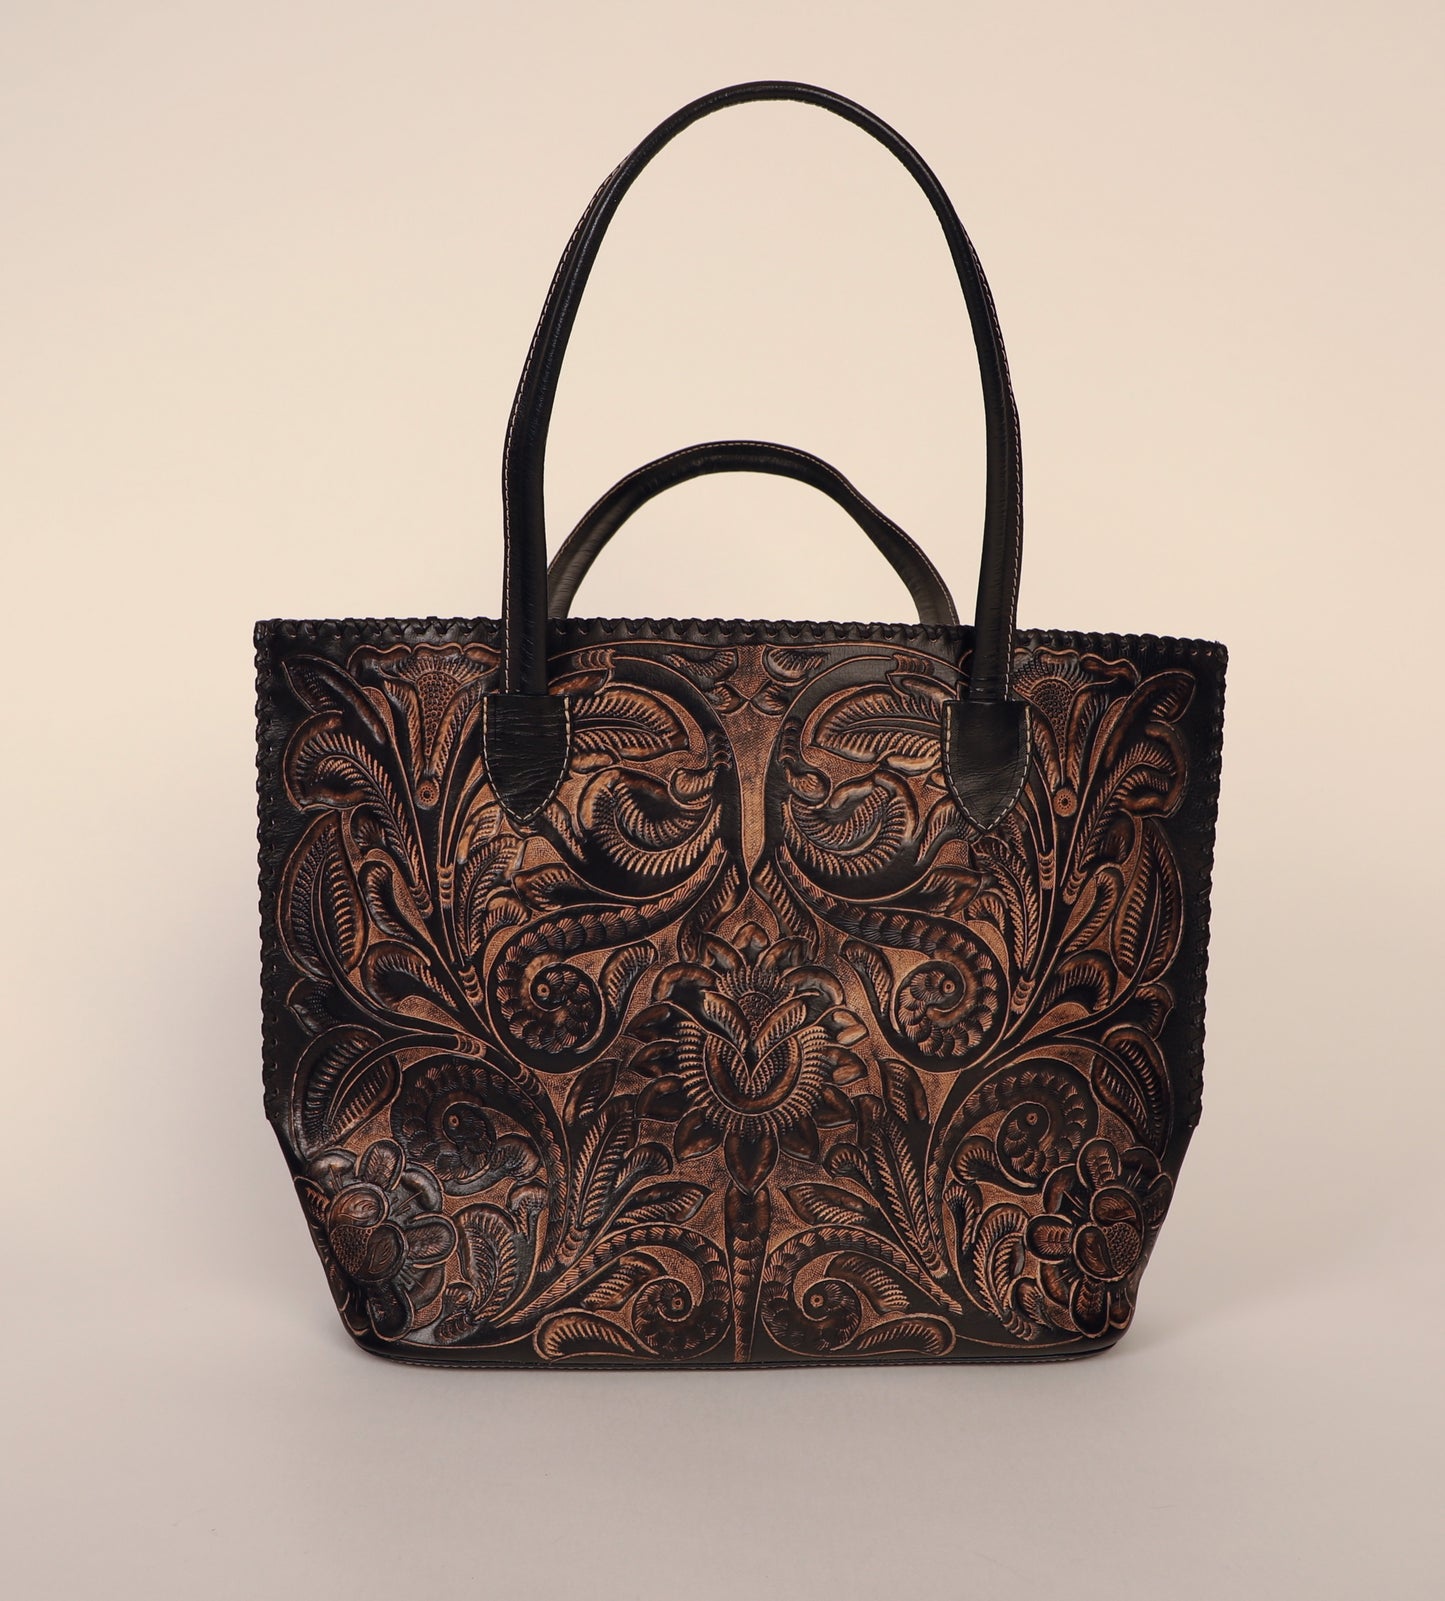 Over-sized authentic leather tote bag with traditional Mexican design etched on both sides. Fully lined with suede. Front view.